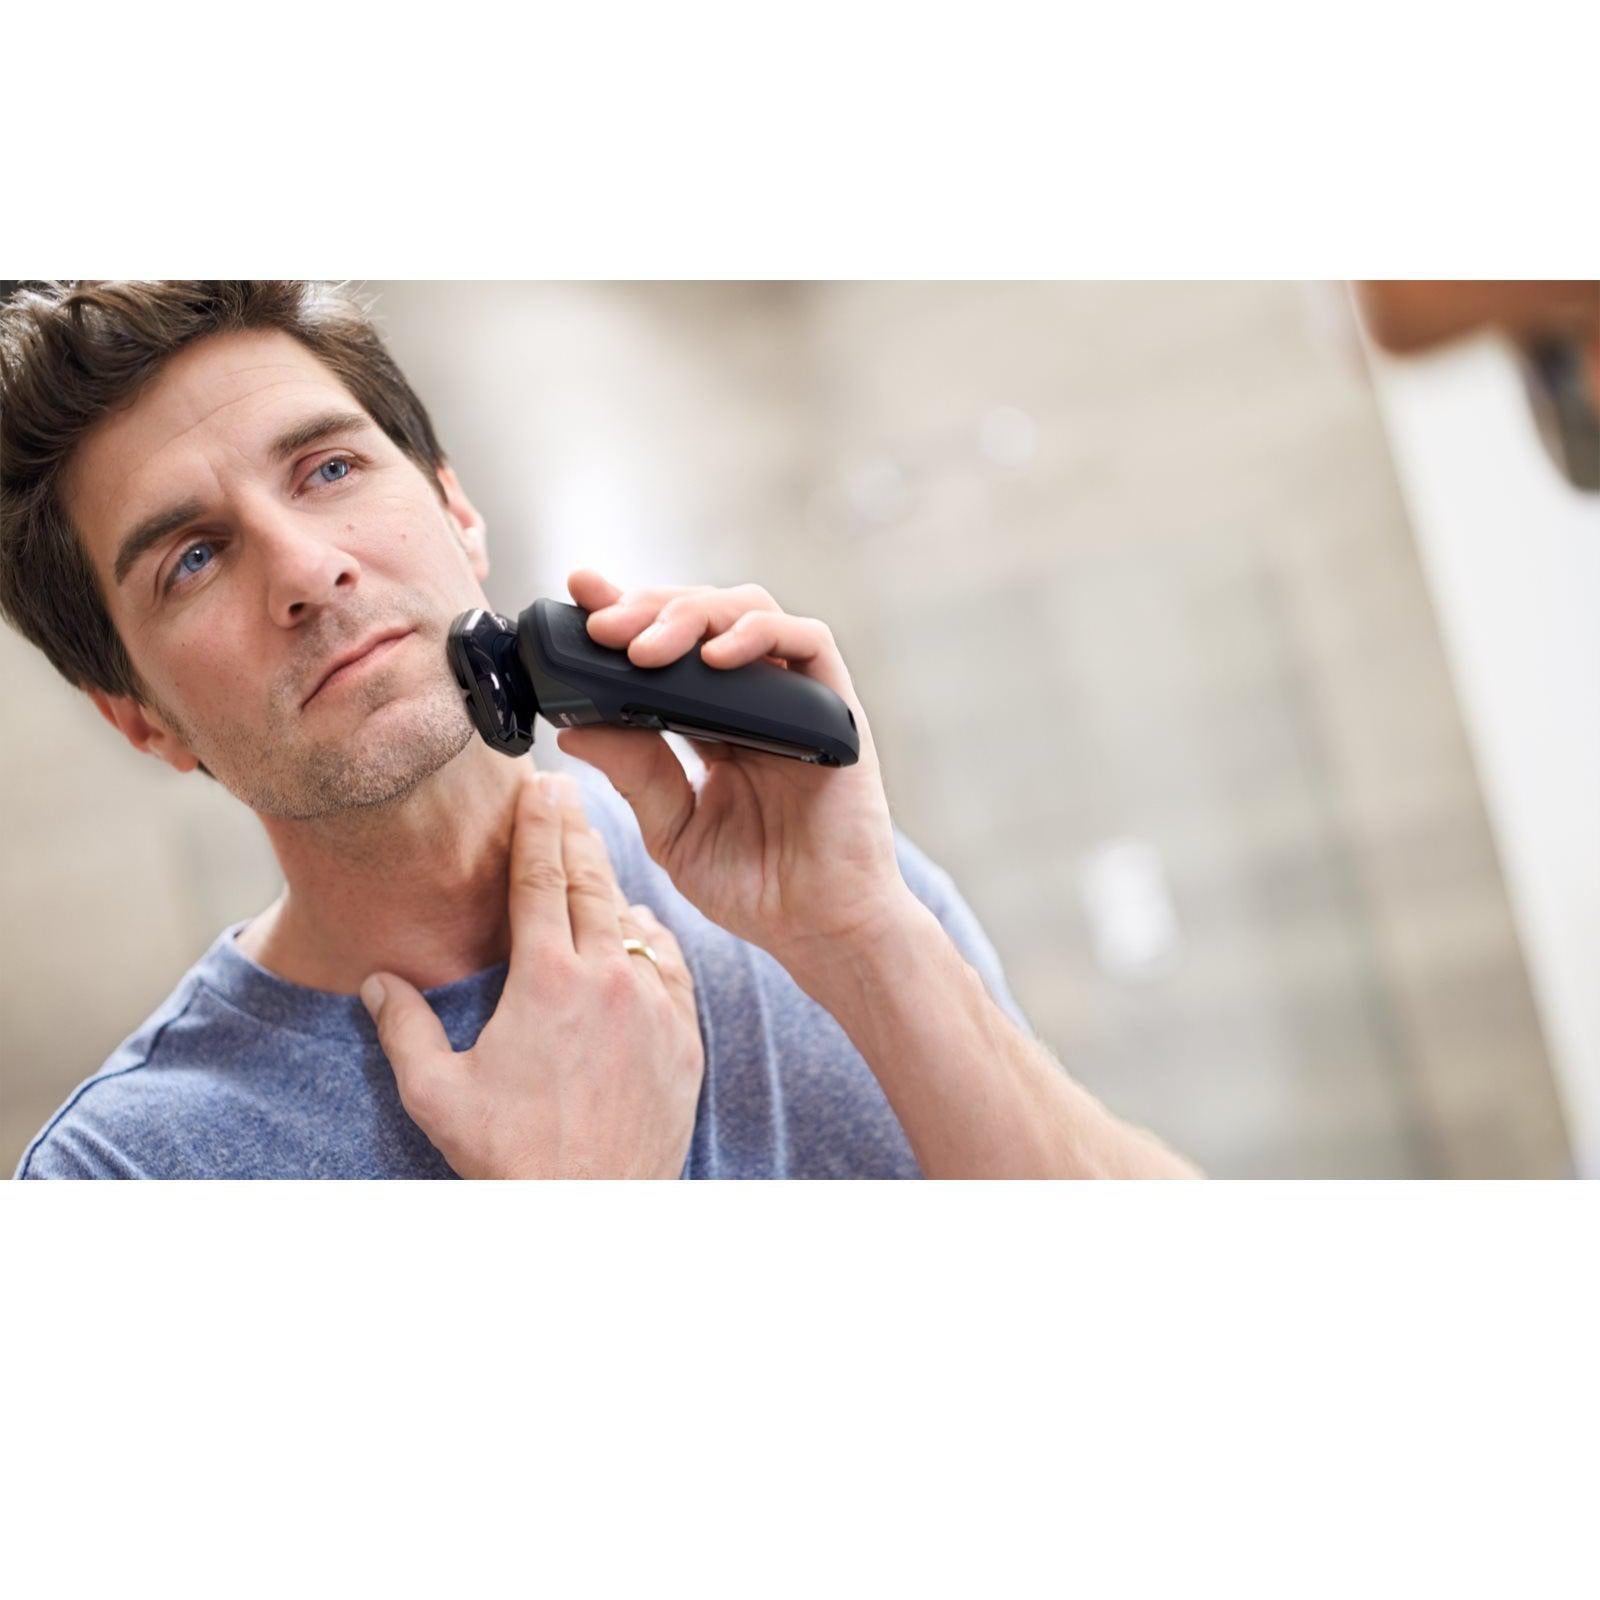 Philips 5000 Series S5587/10 Wet And Dry Electric Shaver with advanced SkinIQ technology - Healthxpress.ie